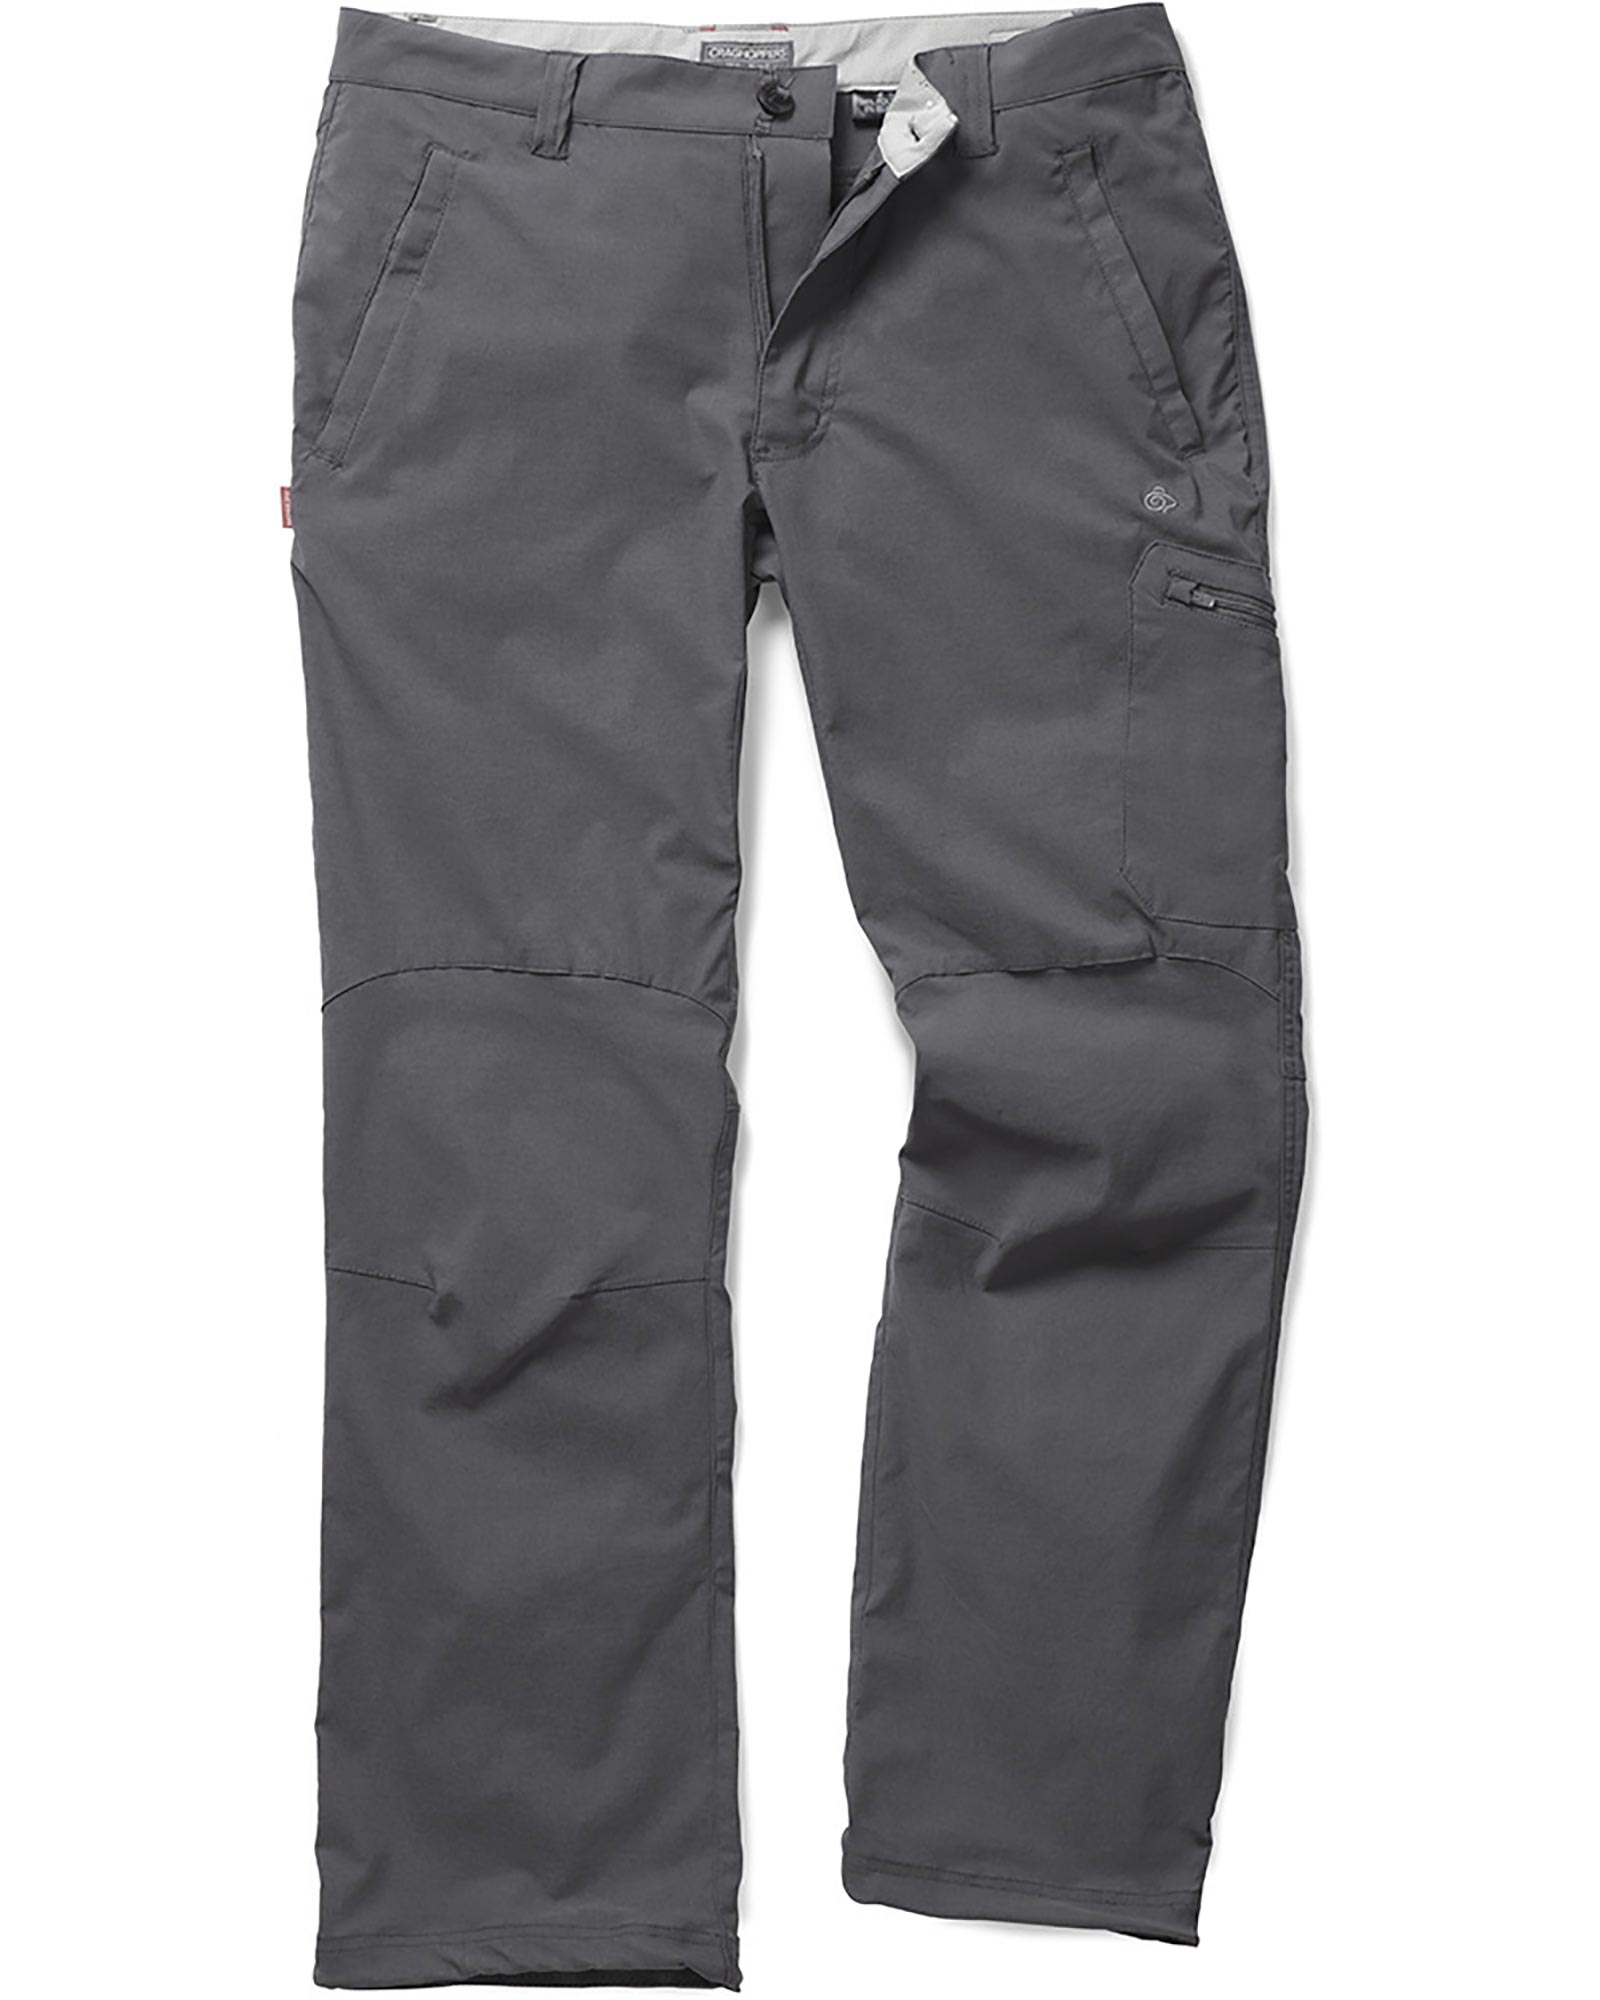 Craghoppers NosiLife Pro Stretch Men’s Trousers - Elephant 30"